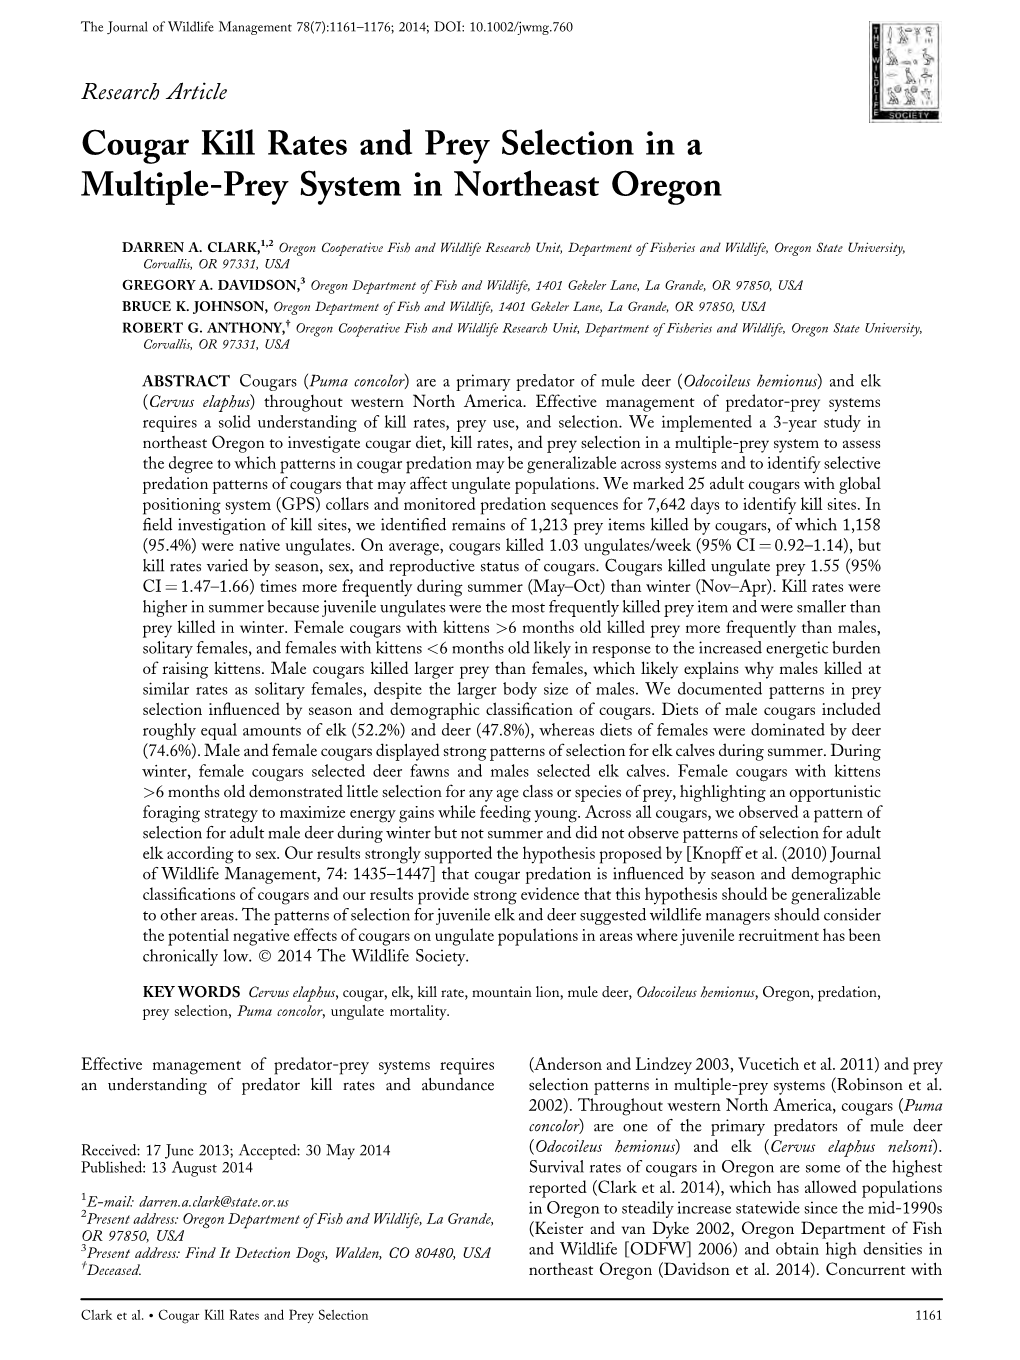 Cougar Kill Rates and Prey Selection in a Multipleprey System in Northeast